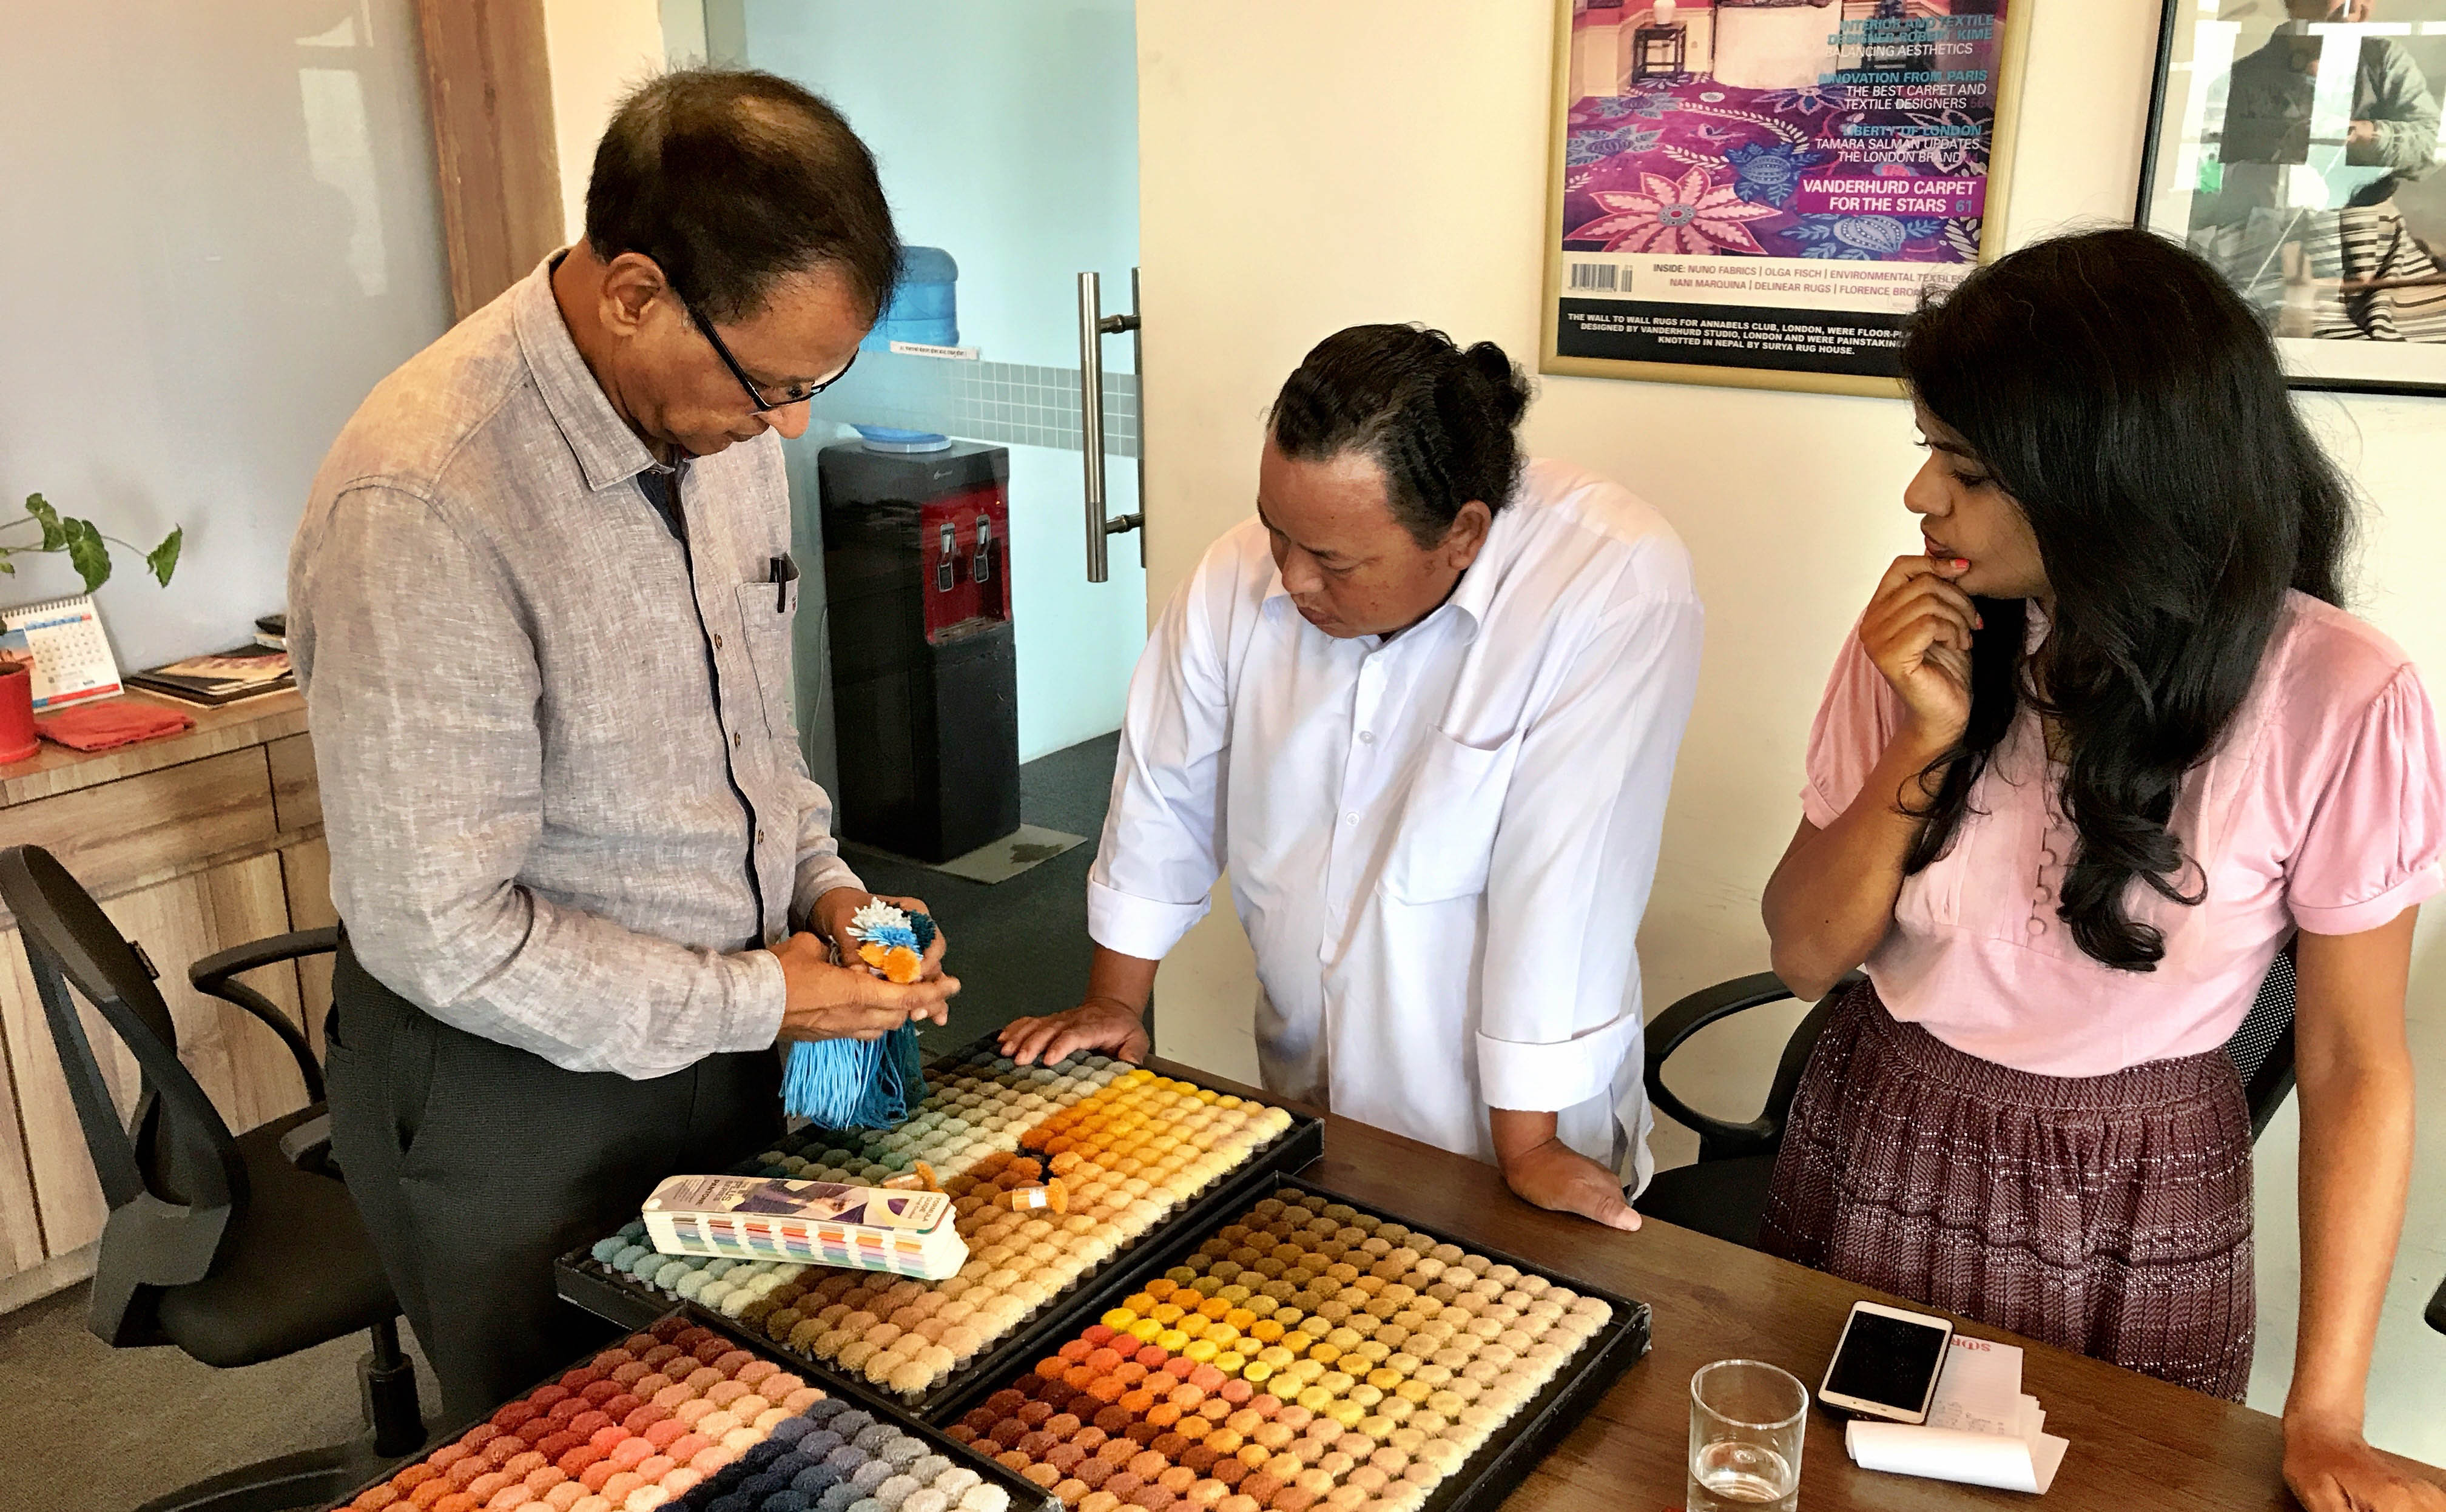 Dev Anand Sarawagi (left) and Shally Sarawagi (right) consult with staff from Sarawagi Rugs' on 17 July 2019 in Kathmandu, Nepal as final colour selections are made for the prototype handknotted rug made from ECONYL® regenerated nylon. | Photograph by The Ruggist.